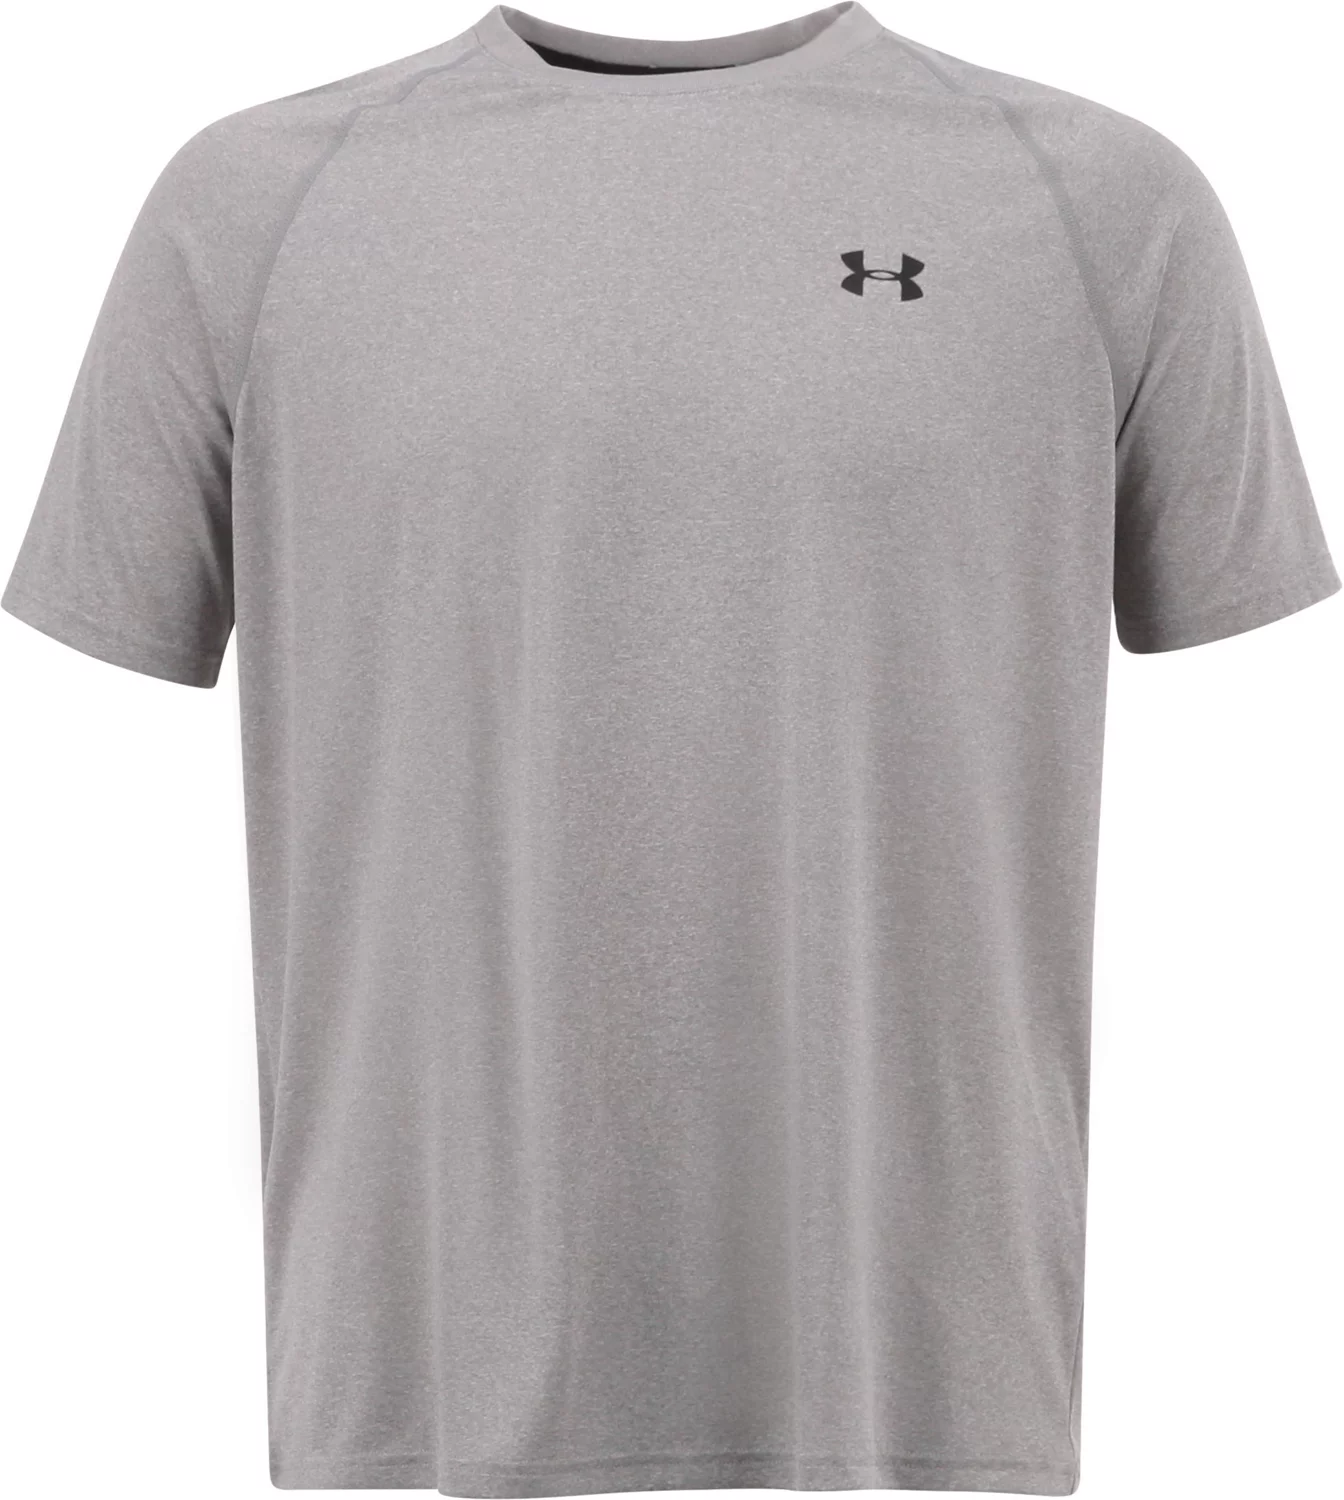 under armor shirts on sale